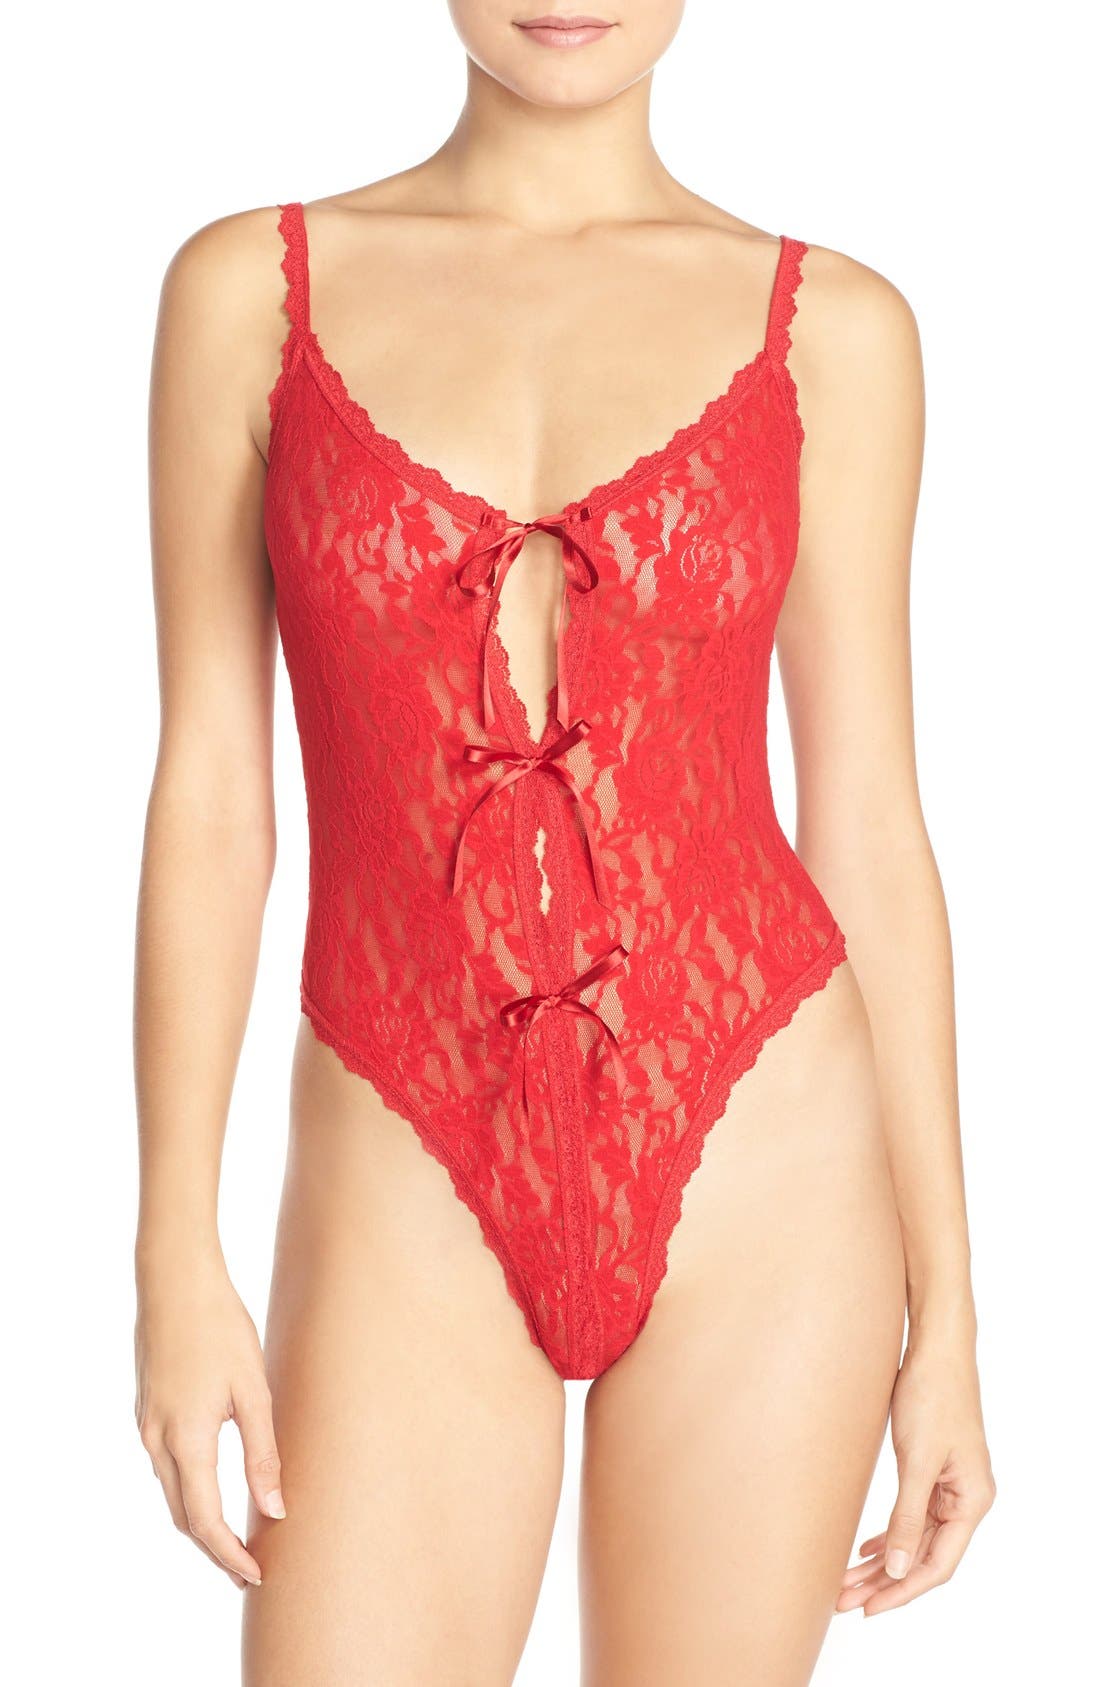 Women's Hanky Panky Signature Lace Open Gusset Thong Teddy